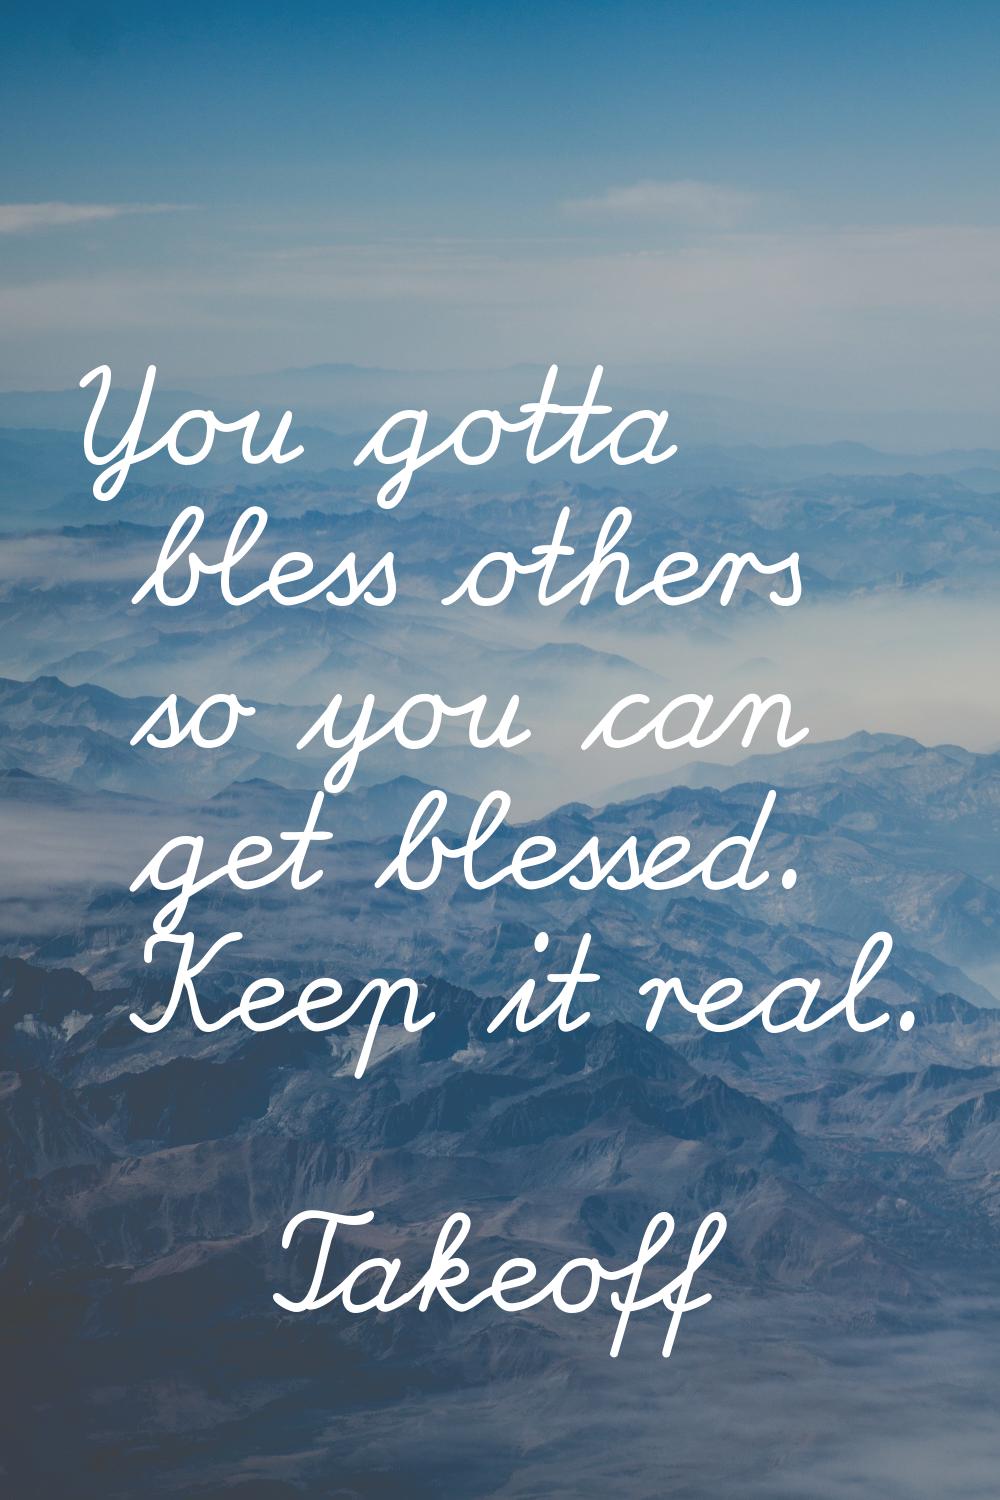 You gotta bless others so you can get blessed. Keep it real.